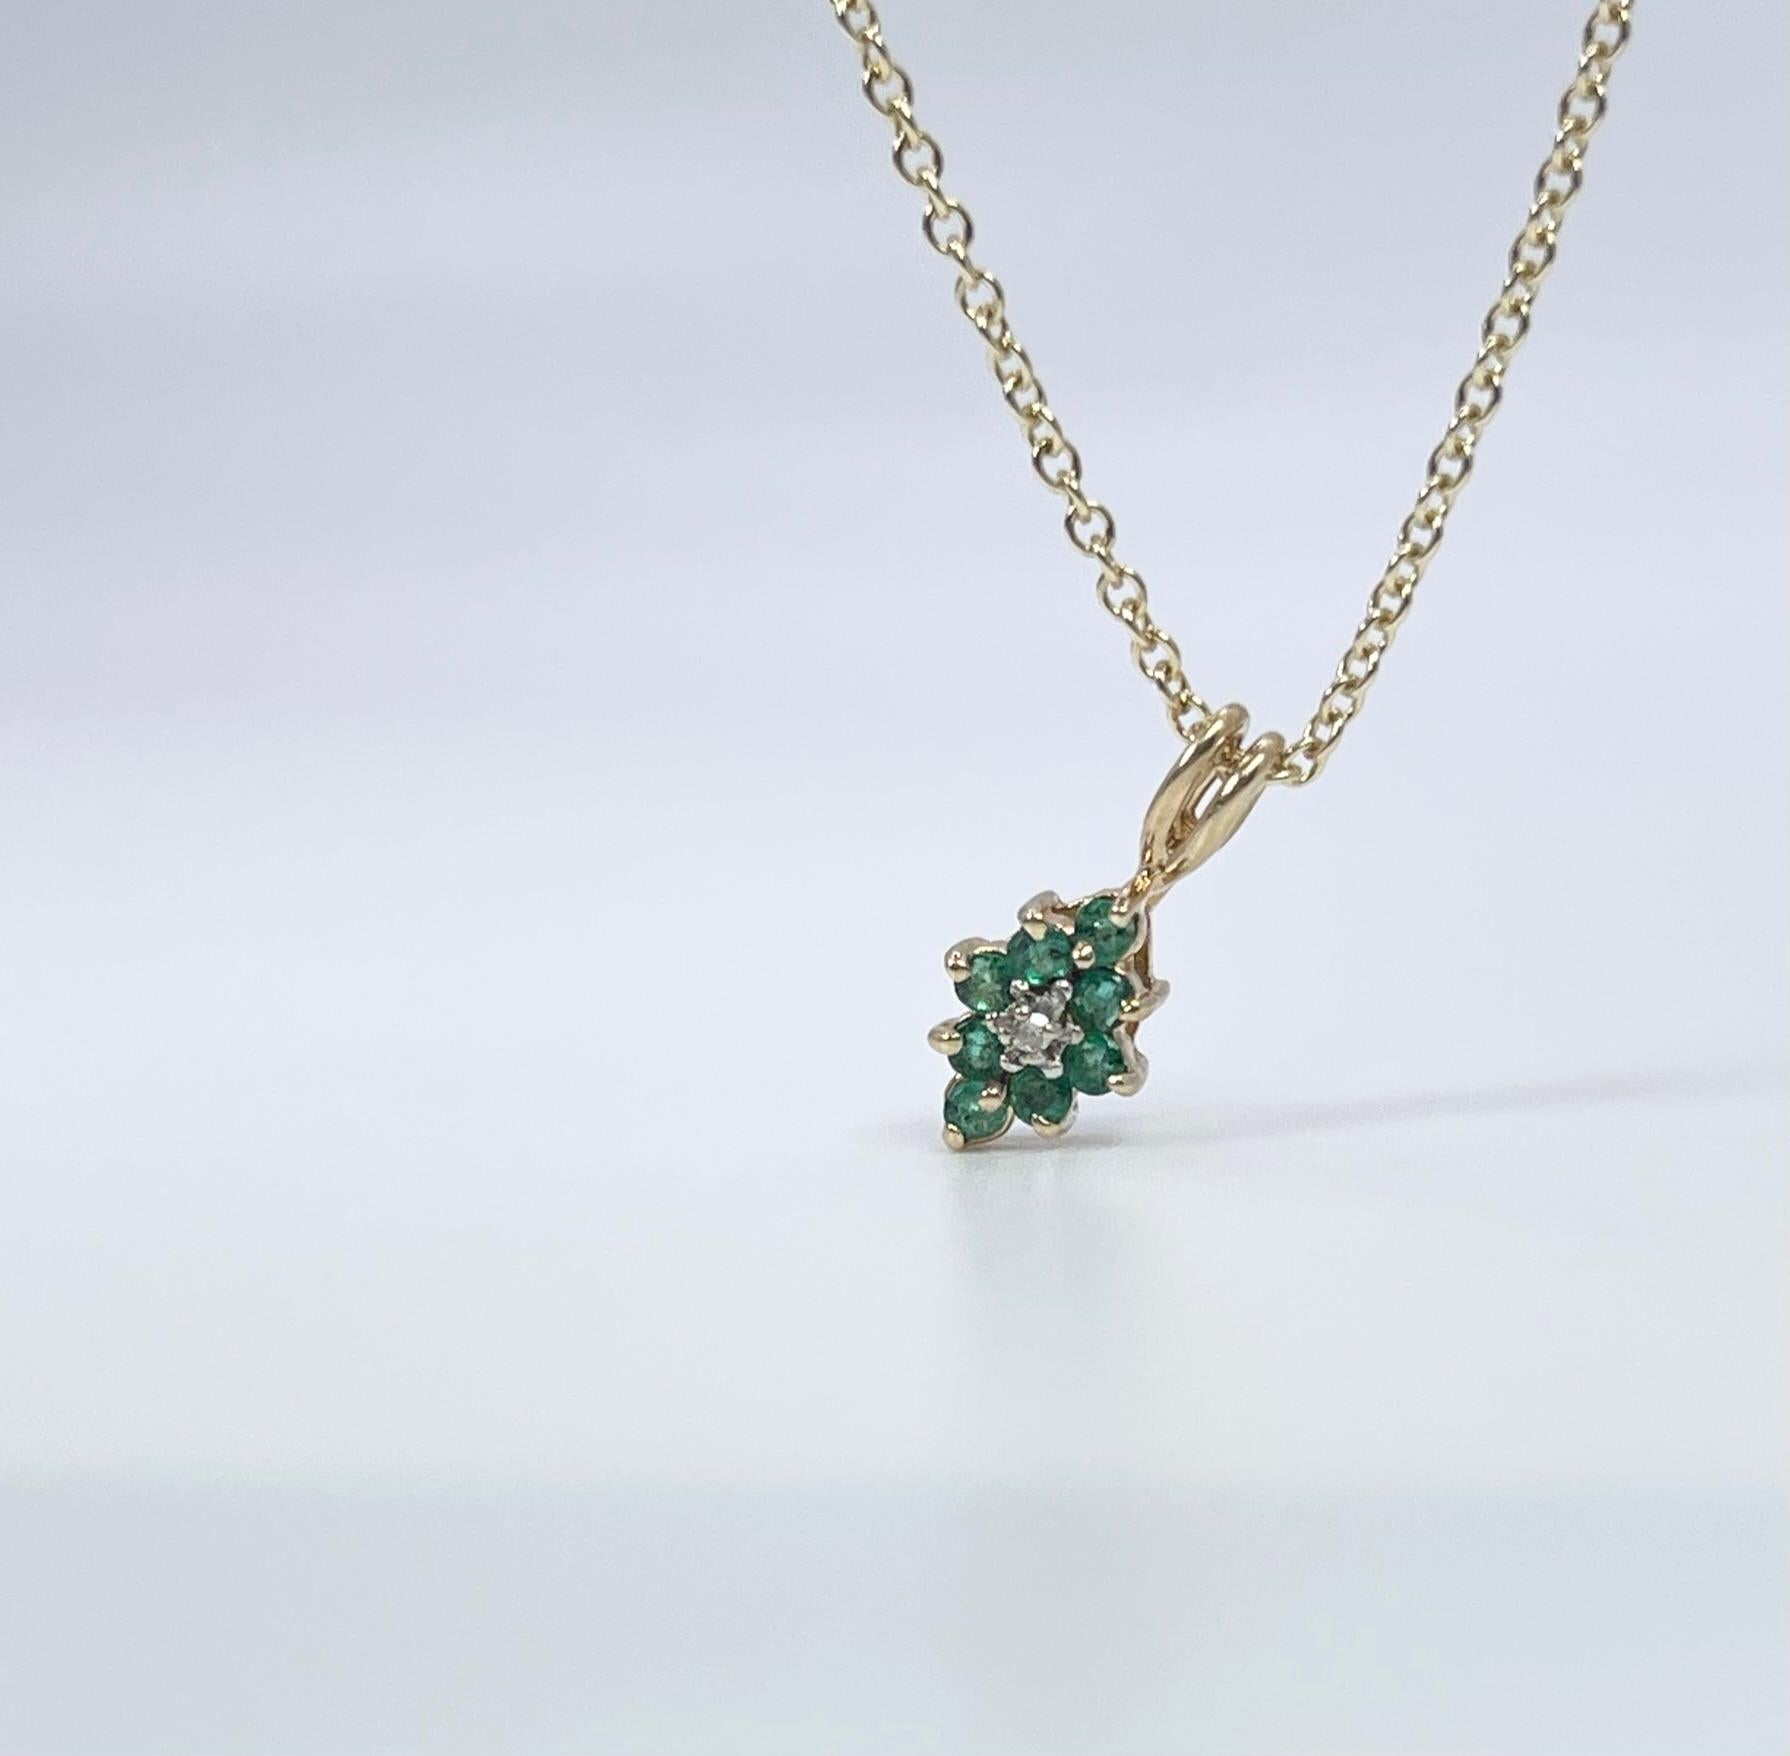 
Small floral pendant in 14KT yellow gold with natural emeralds and diamond in the middle. Pendant comes with chain!

GRAM WEIGHT: 0.90gr
GOLD: 14KT yellow gold
NATURAL EMERALD(S)
Clarity/Color: Heavily Included/Green
NATURAL DIAMOND
Color/Clarity: